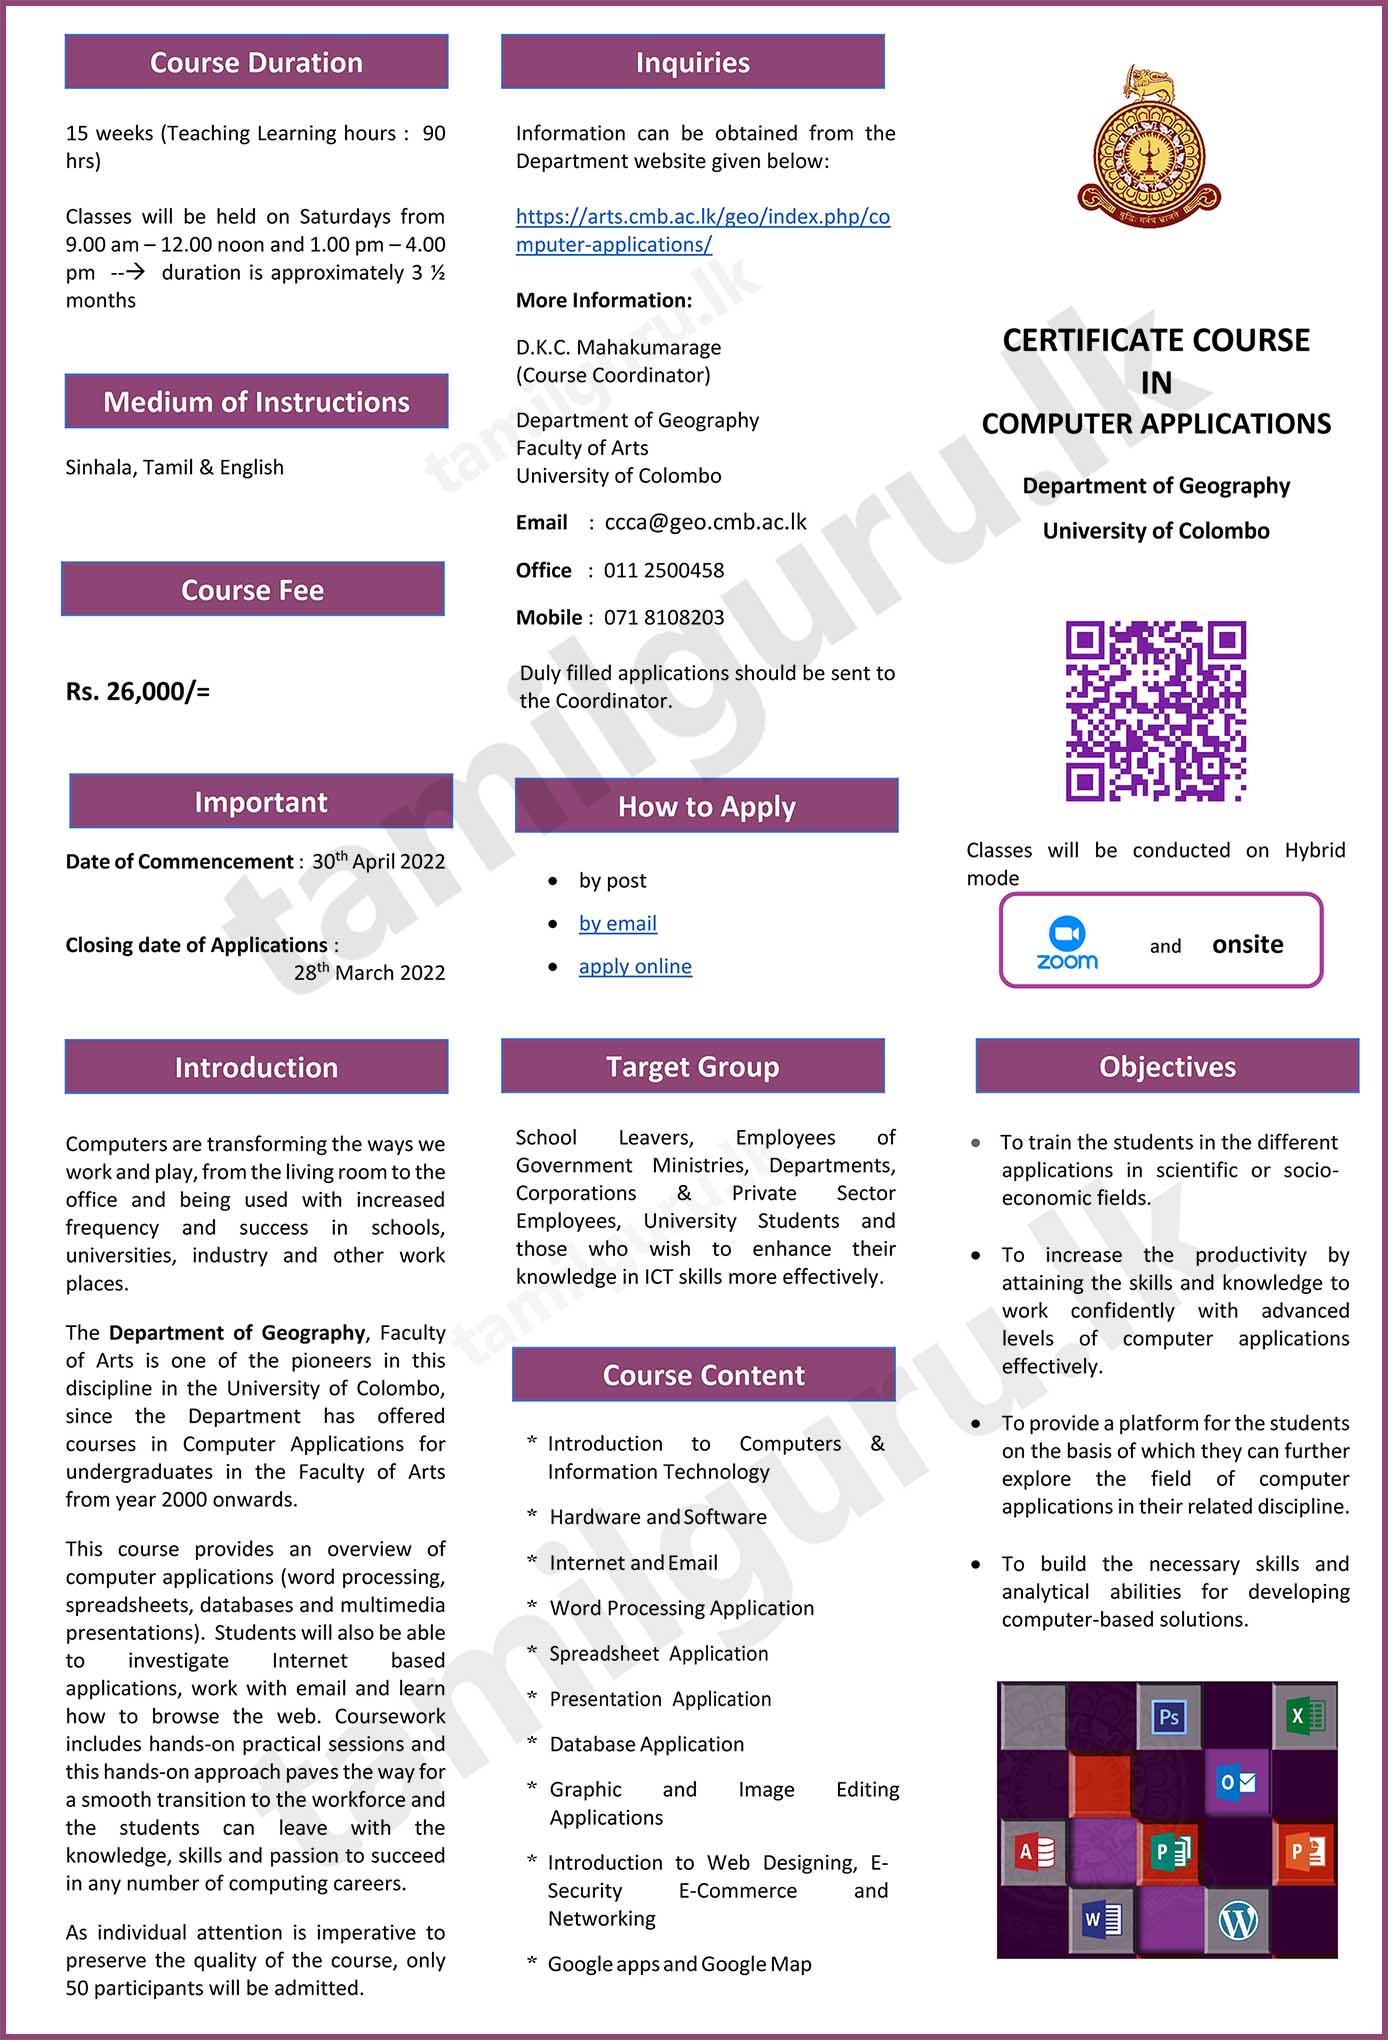 Calling Applications for Certificate Course in Computer Applications (2022) Conducted by the Department of Geography, University of Colombo